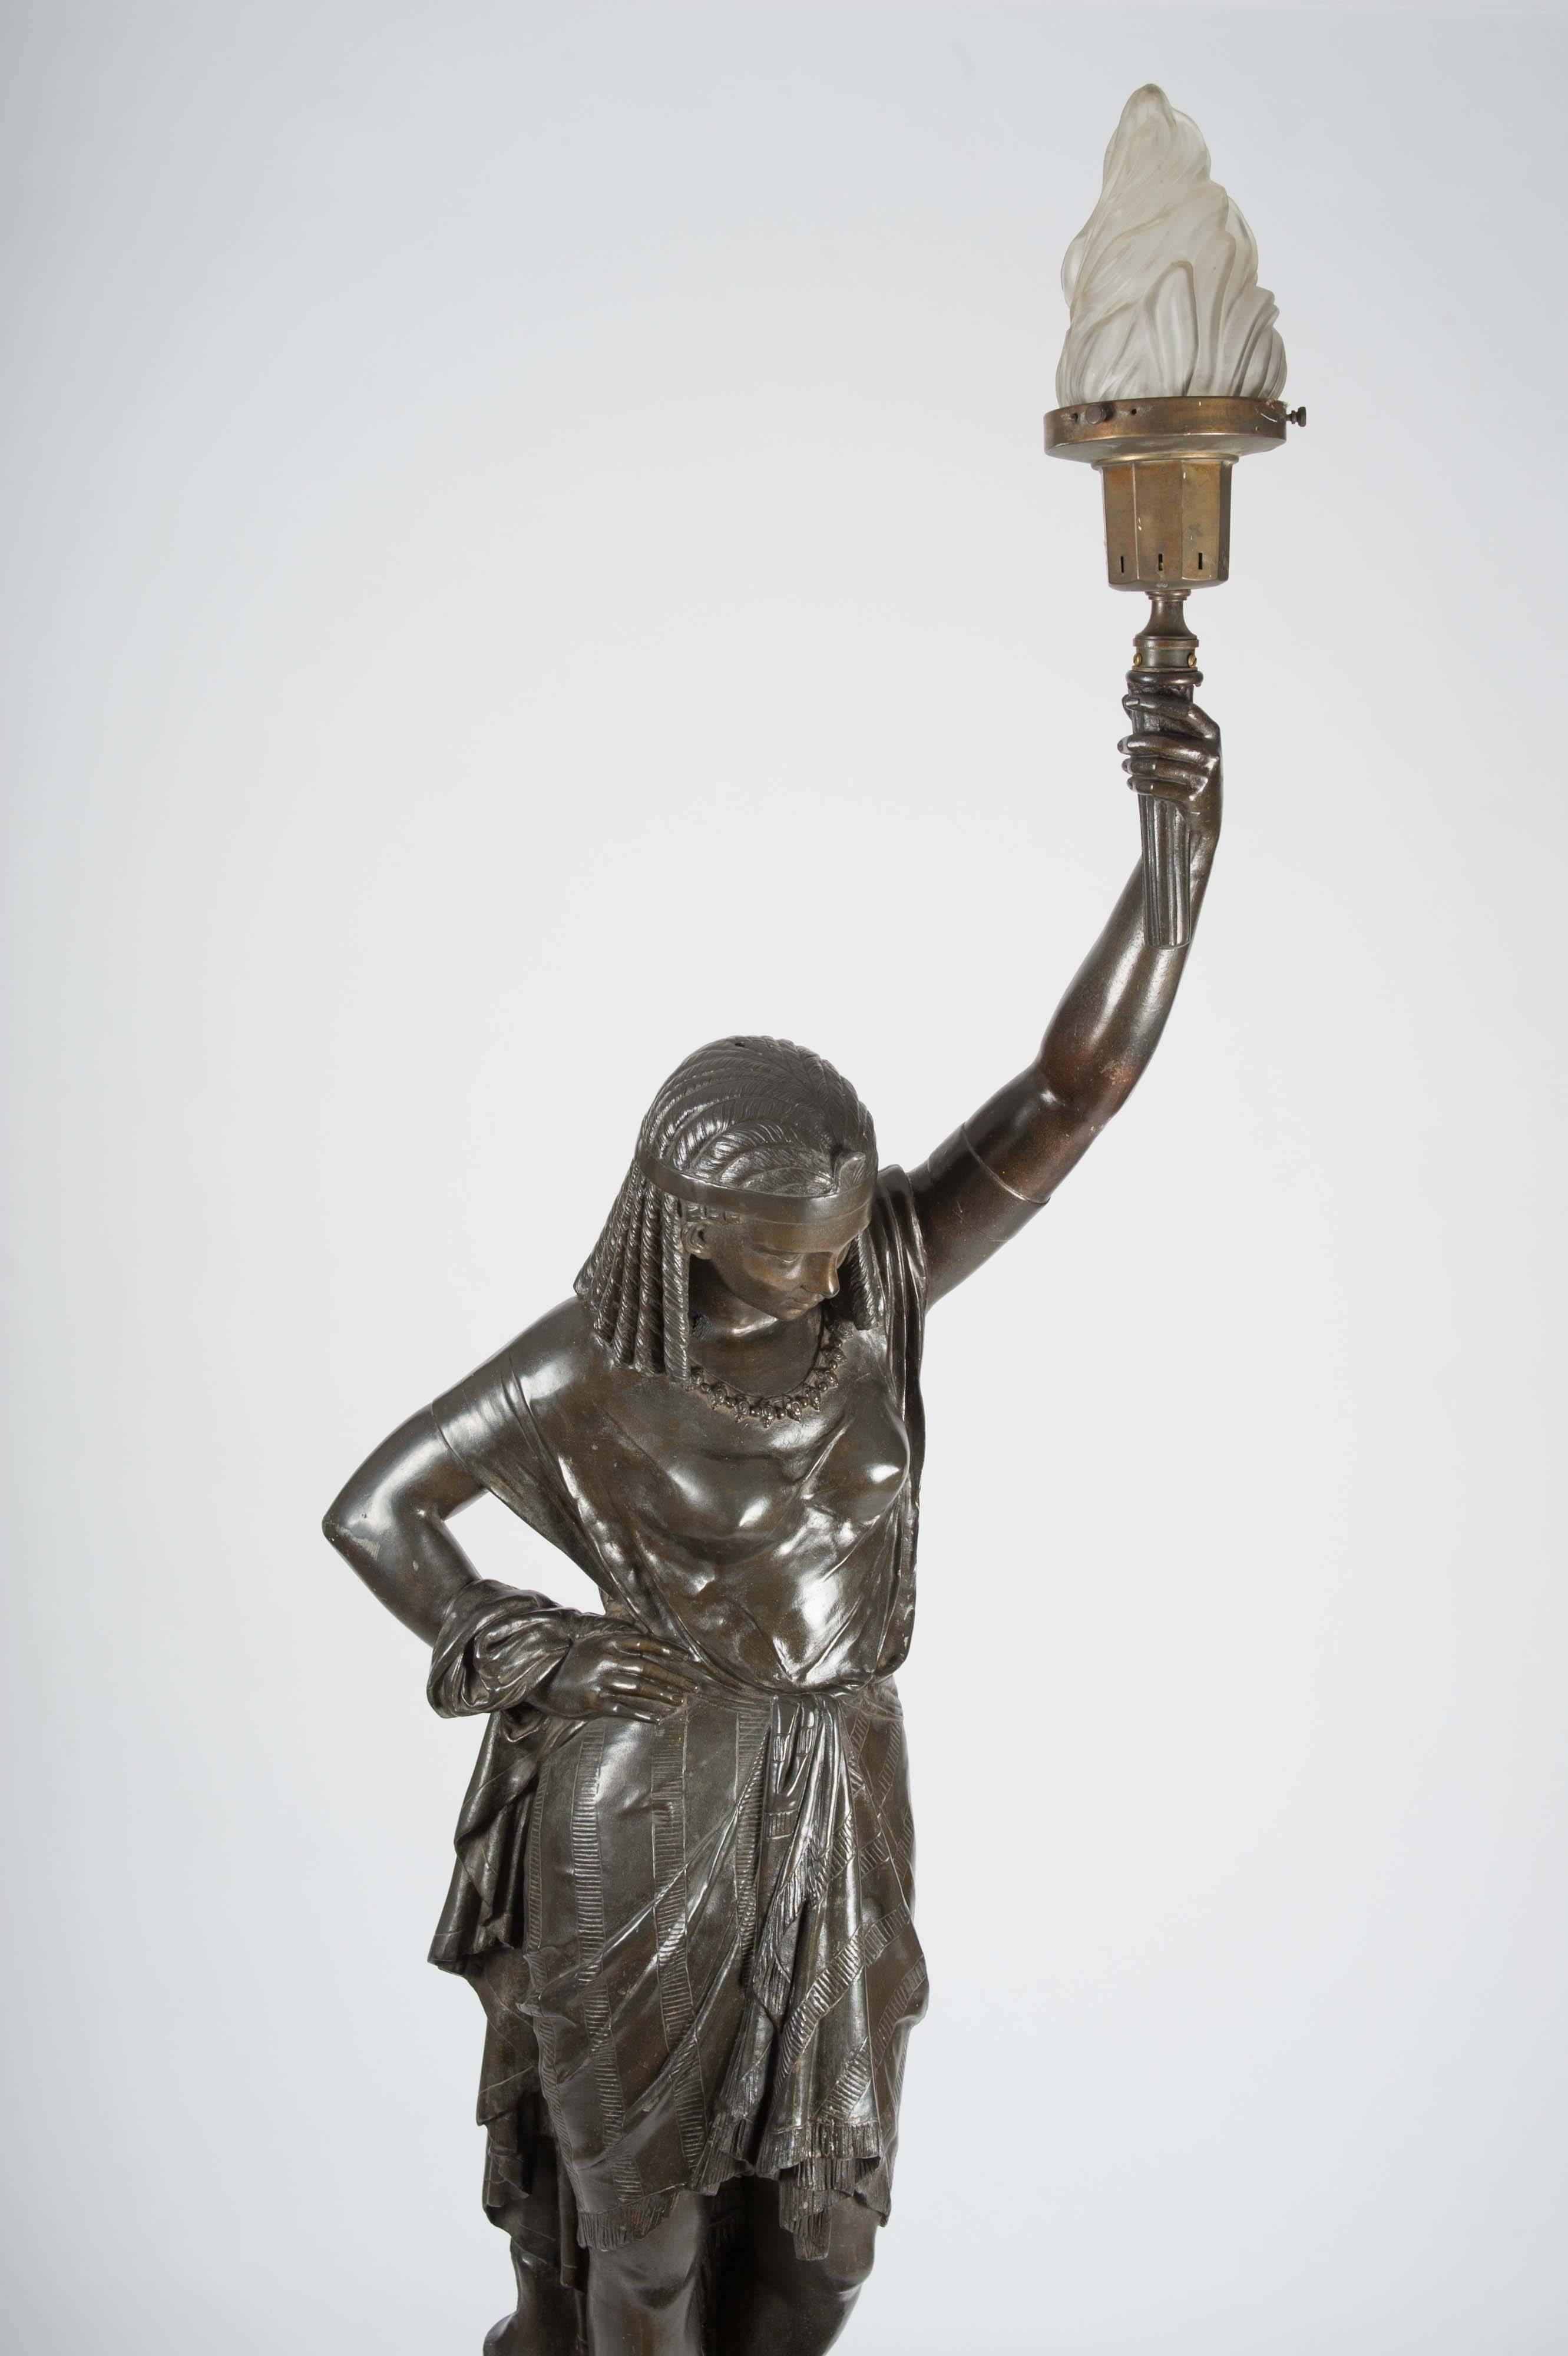 This French bronze sculpture depicts an Egyptian female holding a light in the form of a torch, which would have originally been a gas light. It is a smaller but identical version of the lifesize bronze we have on another listing. The sculpture is